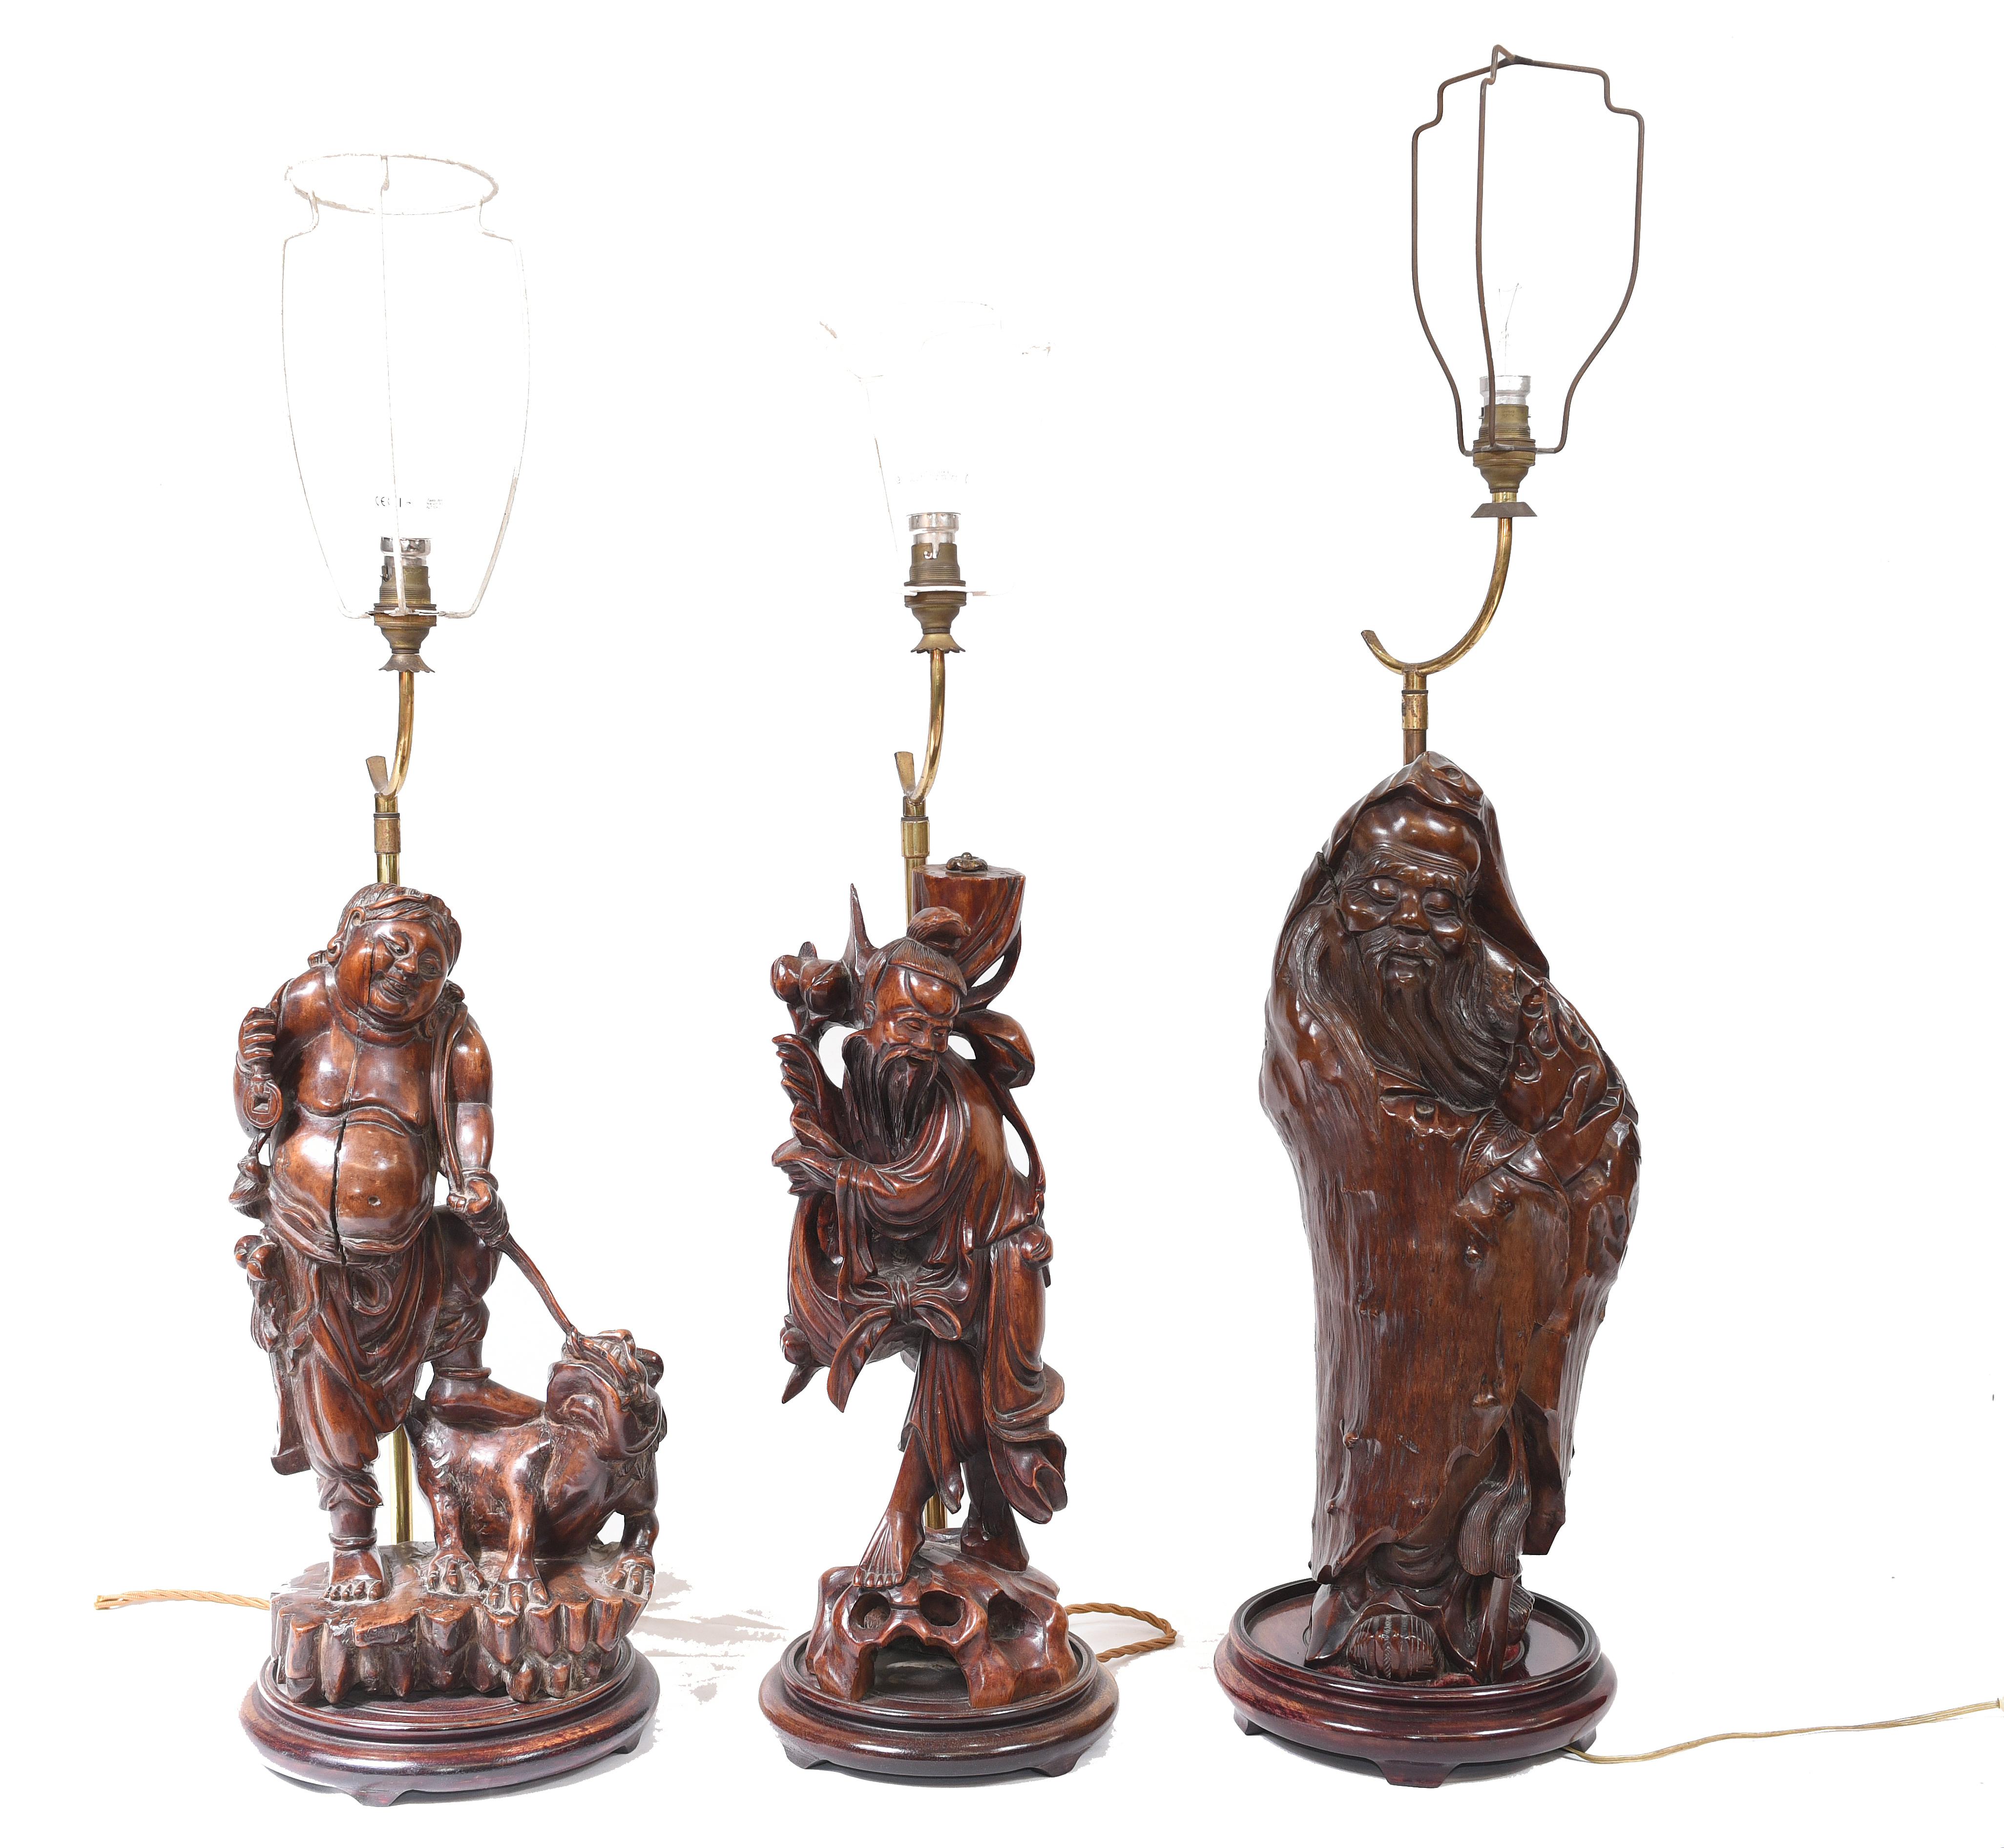 Wonderful set of three hand carved Chinese figurines
Characters include a fat buddha and a wise man
Hand carved from hardwood and we date these to circa 1880
Great details to the carving on this collectable set of lights
Herts showroom, just 25